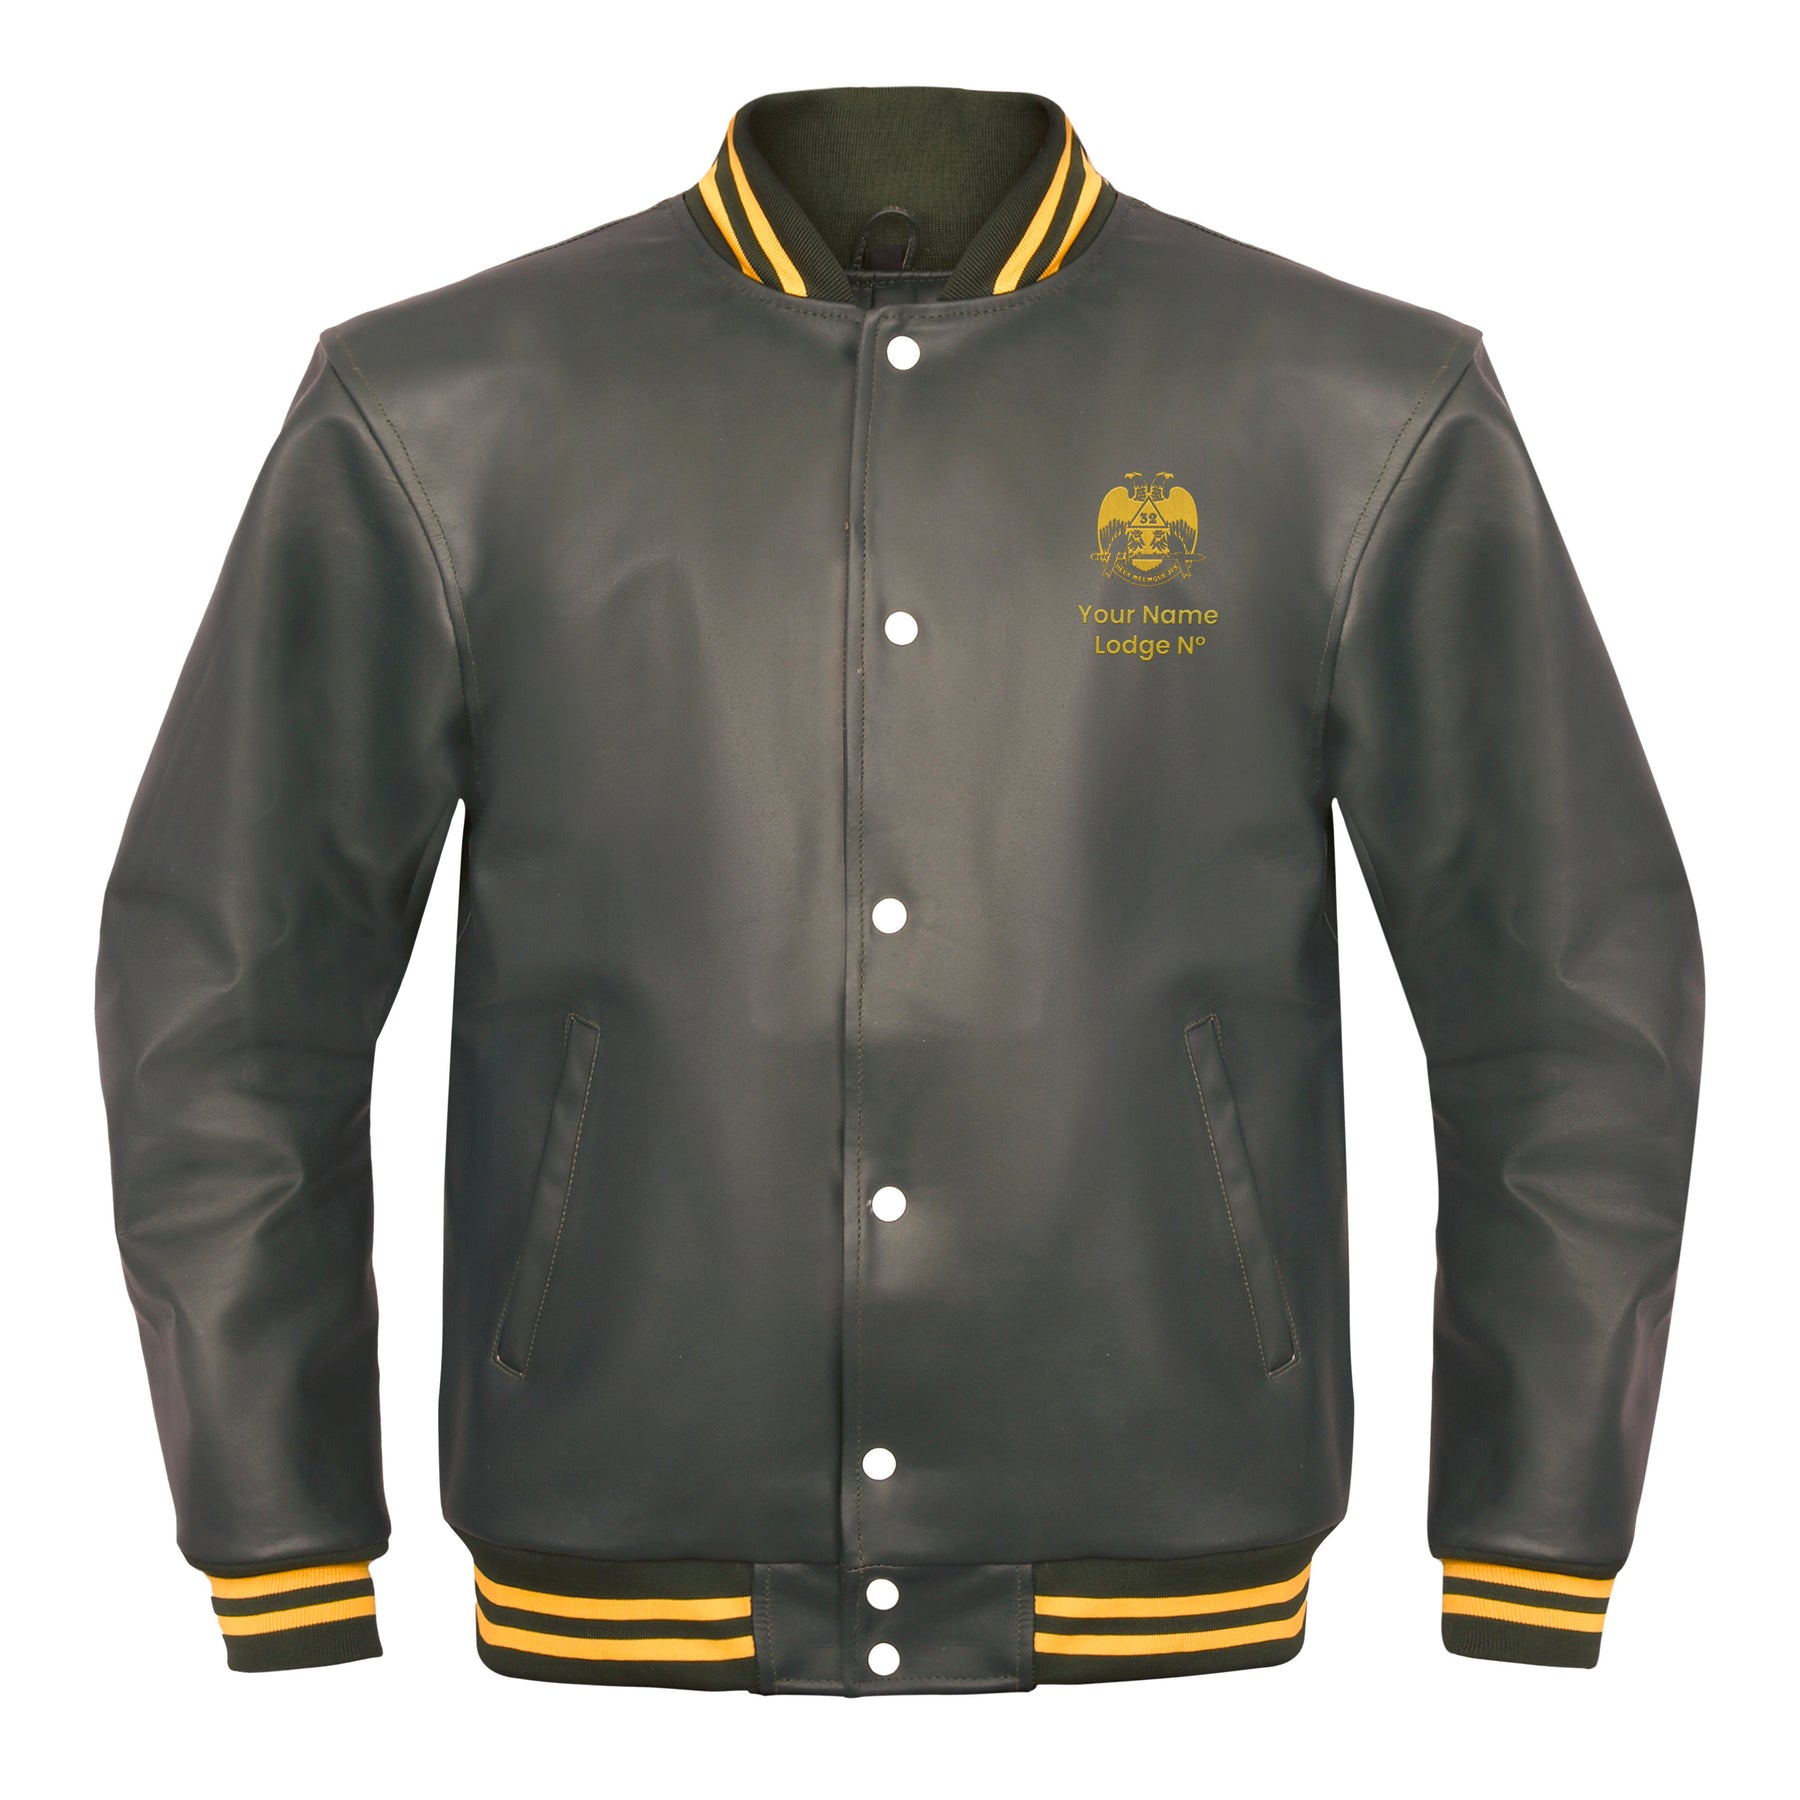 32nd Degree Scottish Rite Jacket - Wings Down Leather With Customizable Gold Embroidery - Bricks Masons